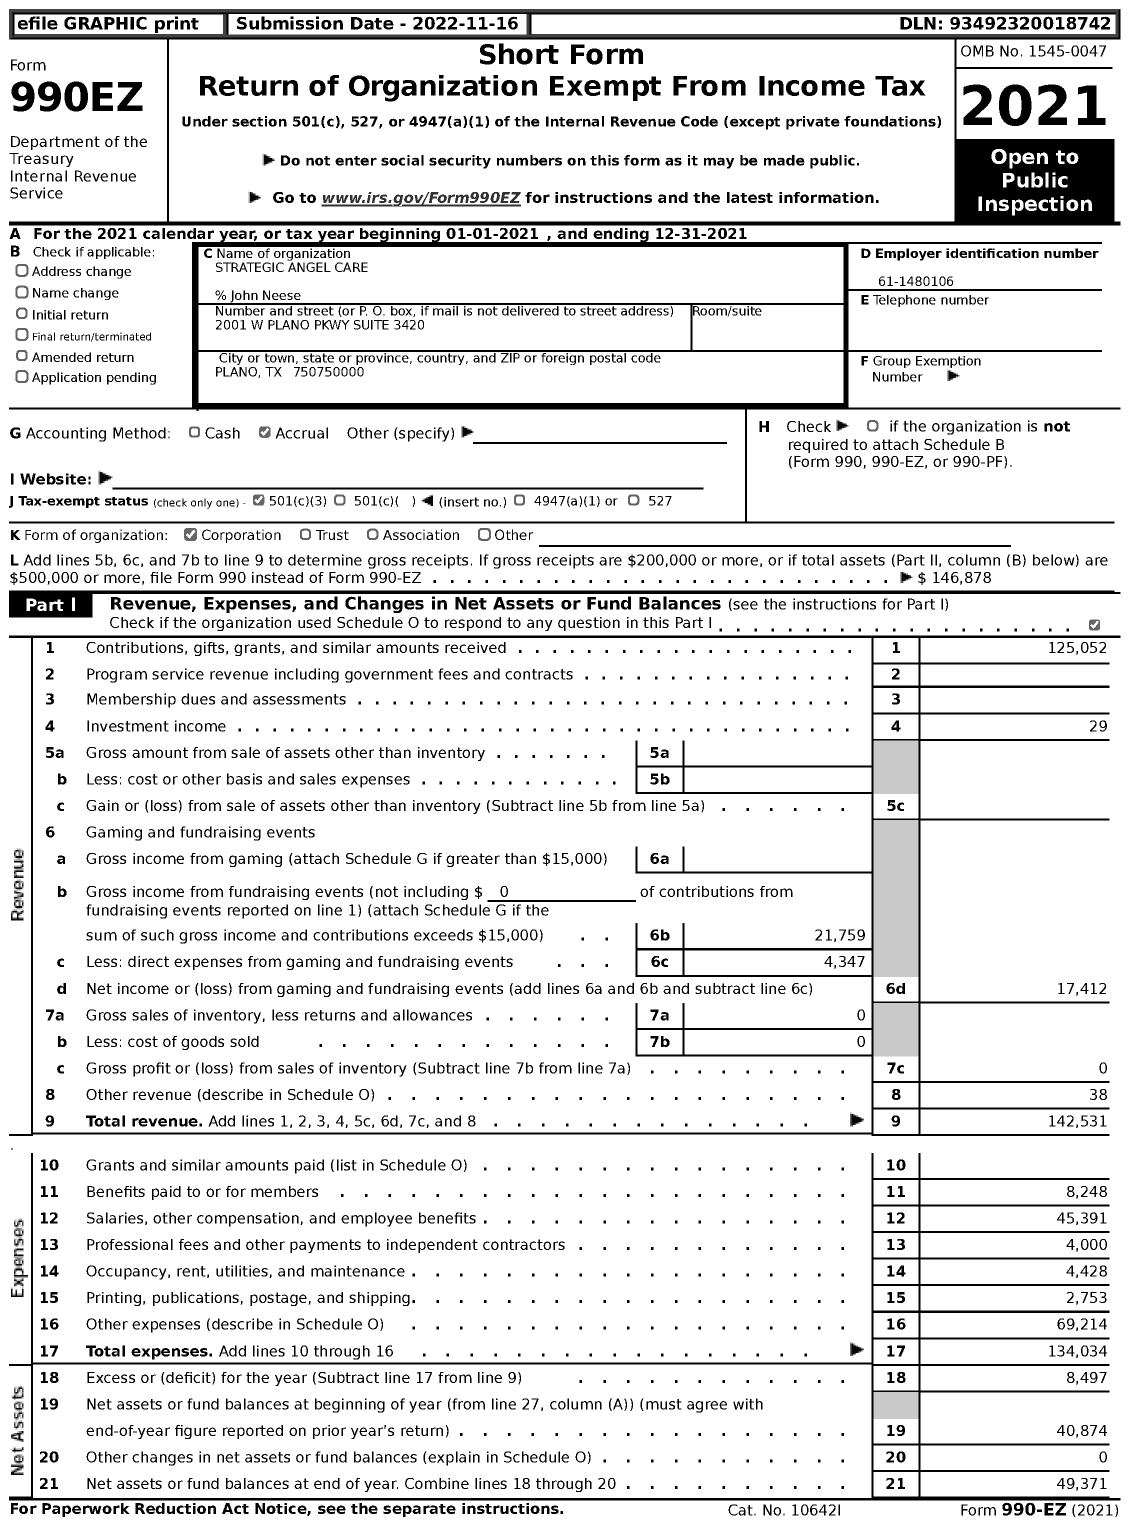 Image of first page of 2021 Form 990EZ for Strategic Angel Care